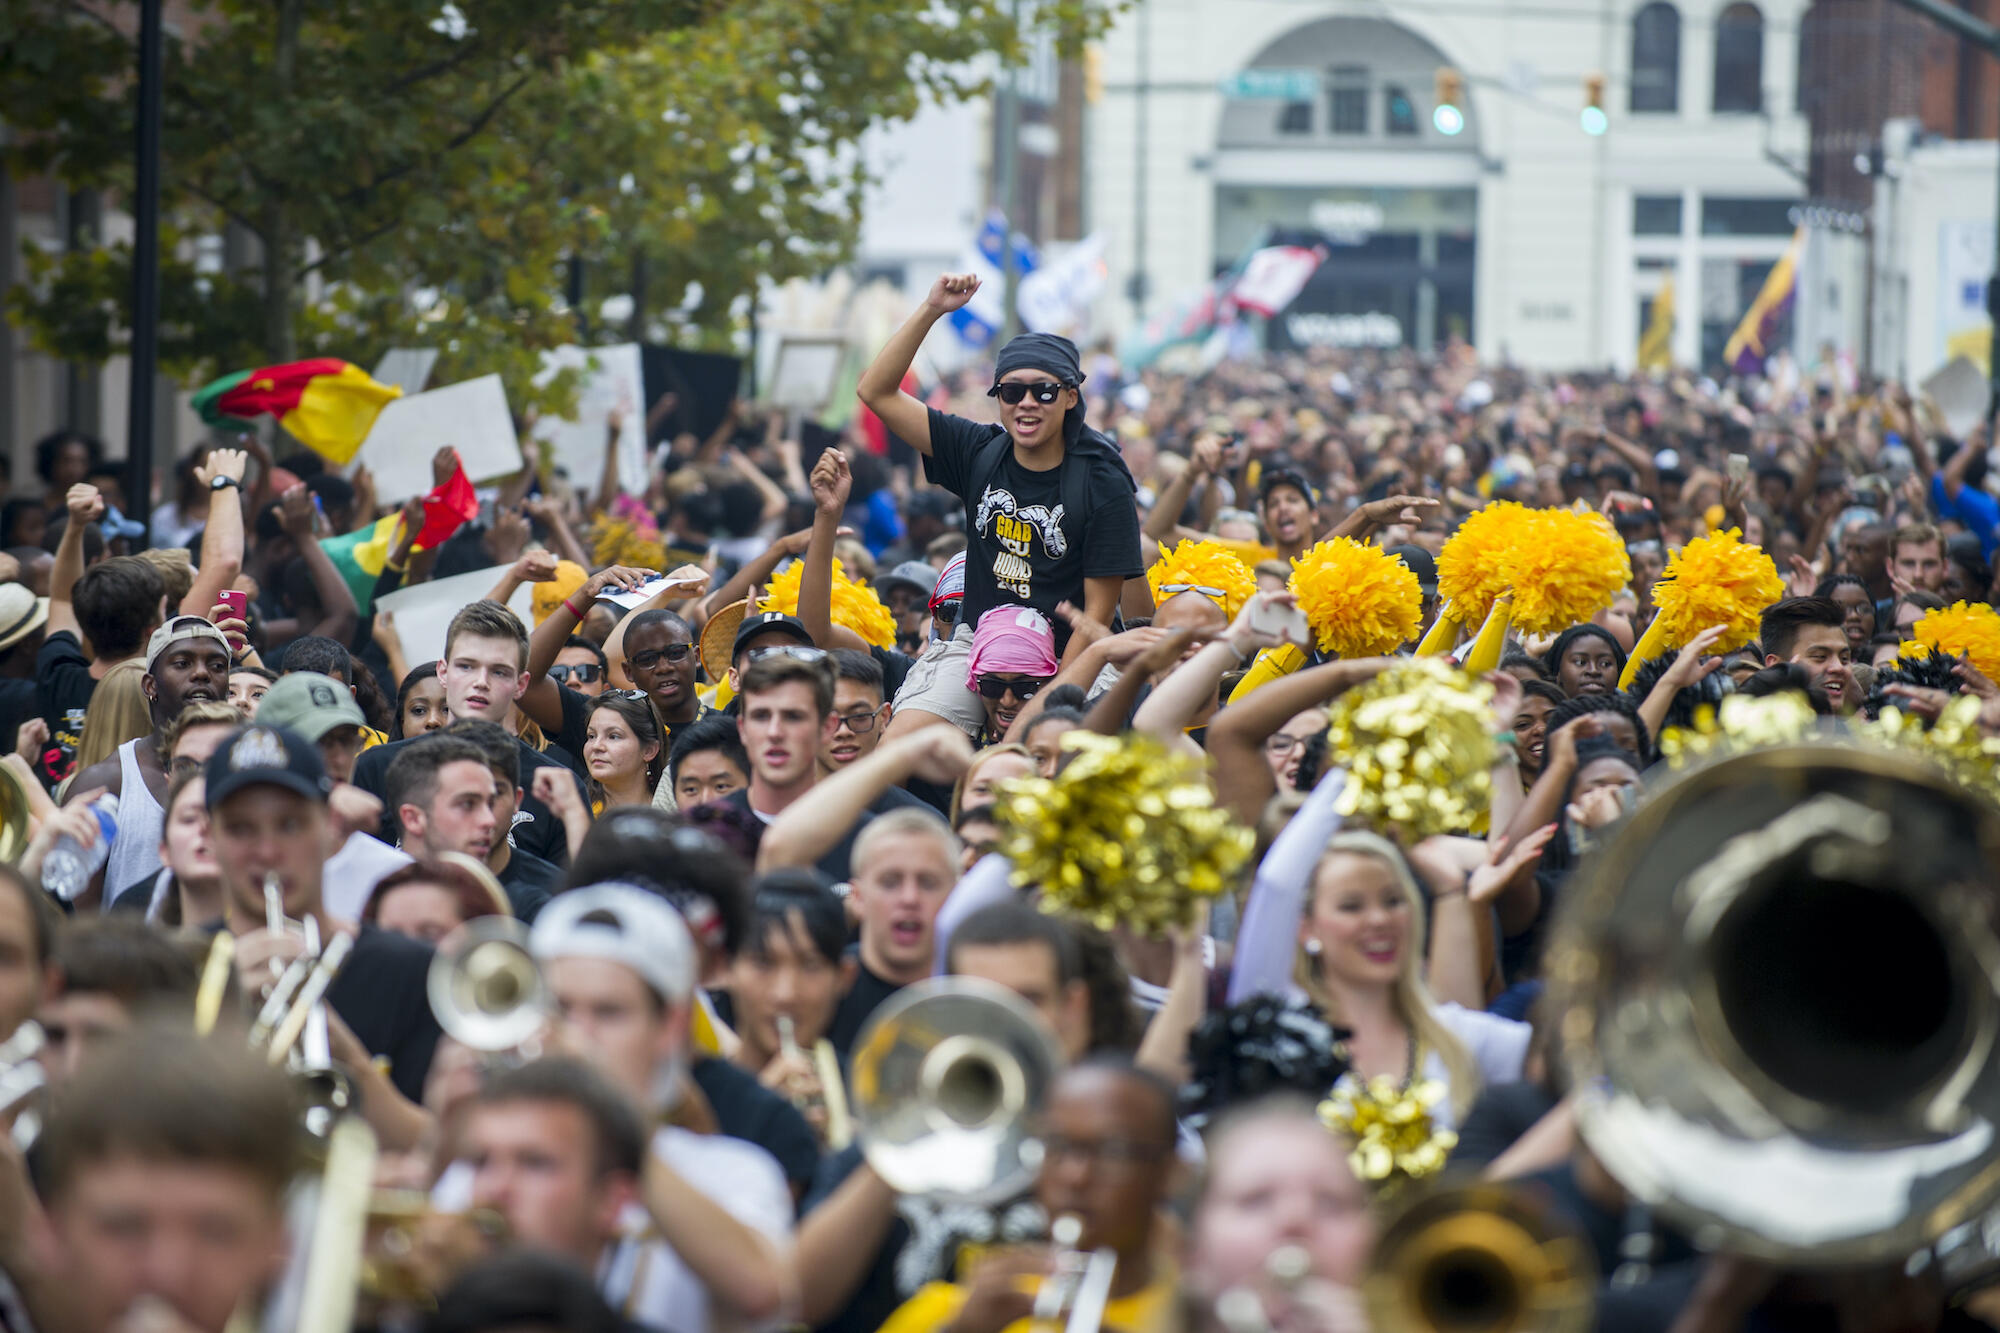 In this 2015 photo, hundreds of VCU students parade through the Monroe Park Campus for the Ram Spirit Walk.